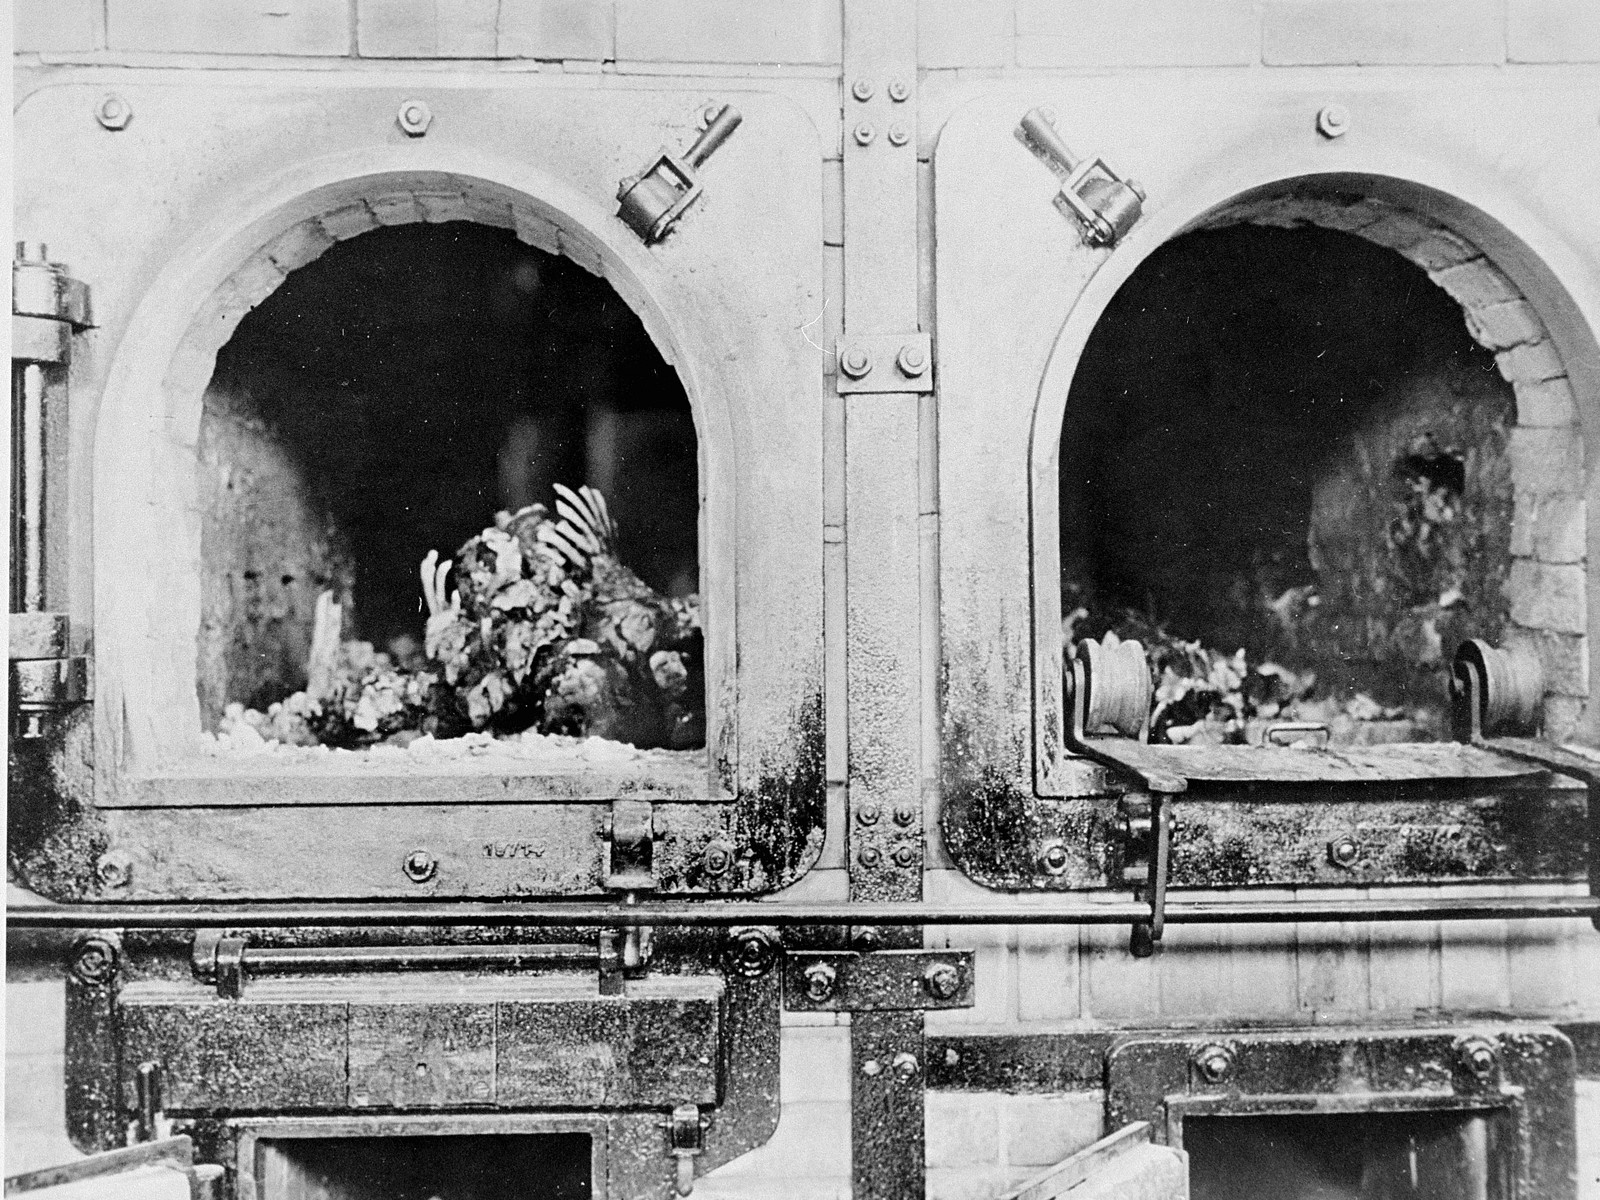 The charred remains of former prisoners in two crematoria ovens in the newly liberated Buchenwald concentration camp.

Original caption reads:  "These charred remains of former prisoners were found in the crematory of the Buchenwald concentration camp just outside Weimar when U.S. forces entered the area"